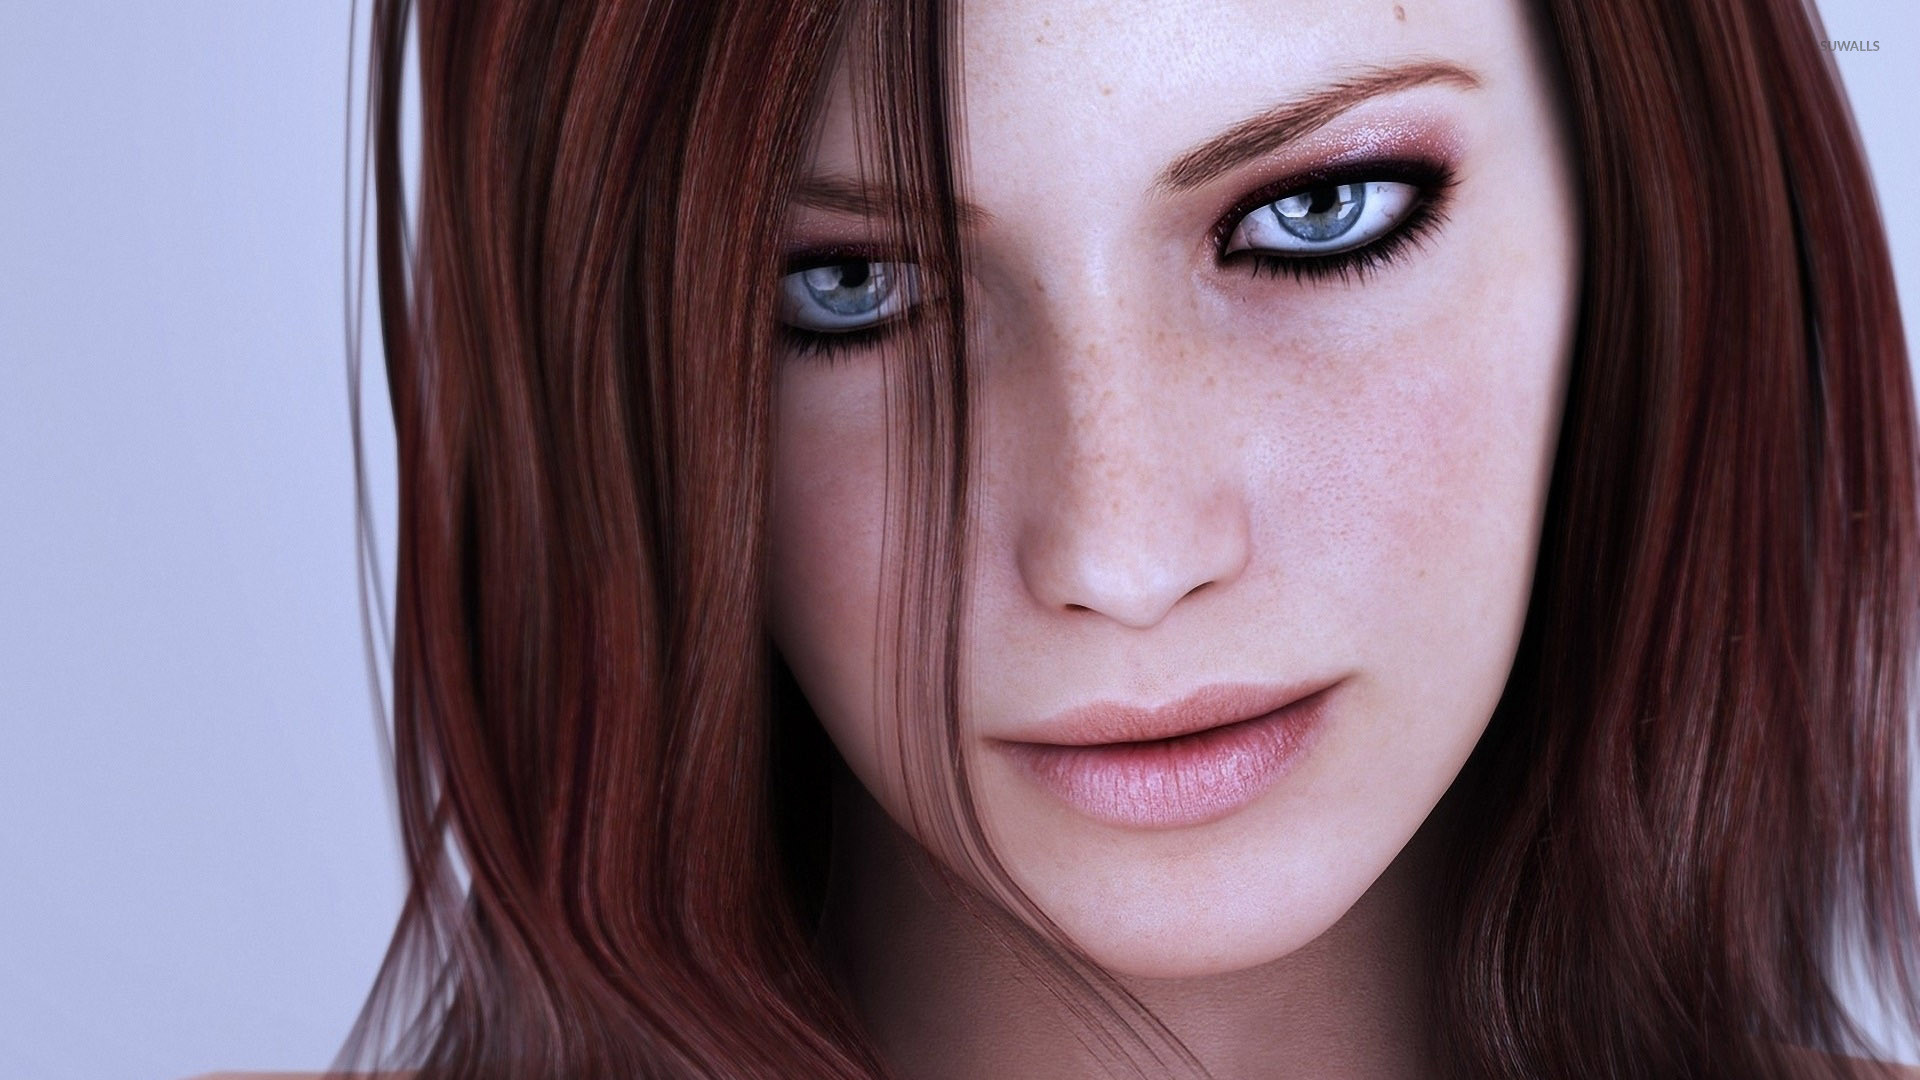 Amazing redhead with freckles wallpaper jpg